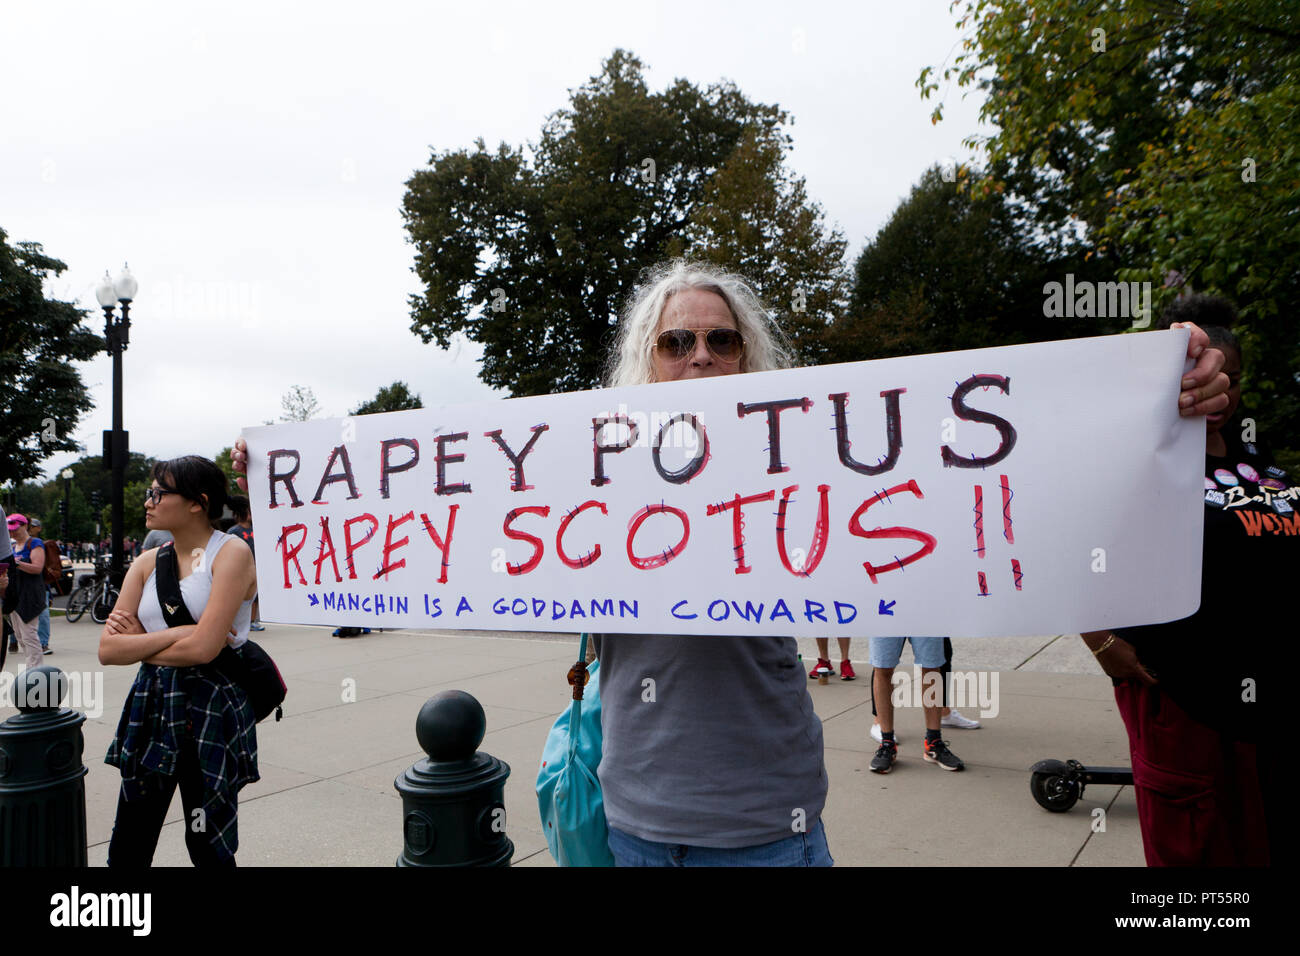 Washington, USA, 6th Oct, 2018: On the day of the final vote to confirm Brett Kavanaugh to the US Supreme Court, thousands of democrat activists protest in front of the Supreme Court building and the US Capitol. Pictured: Woman holding sign suggesting rape by Kavanaugh and Trump.  Credit: B Christopher/Alamy Live News Stock Photo